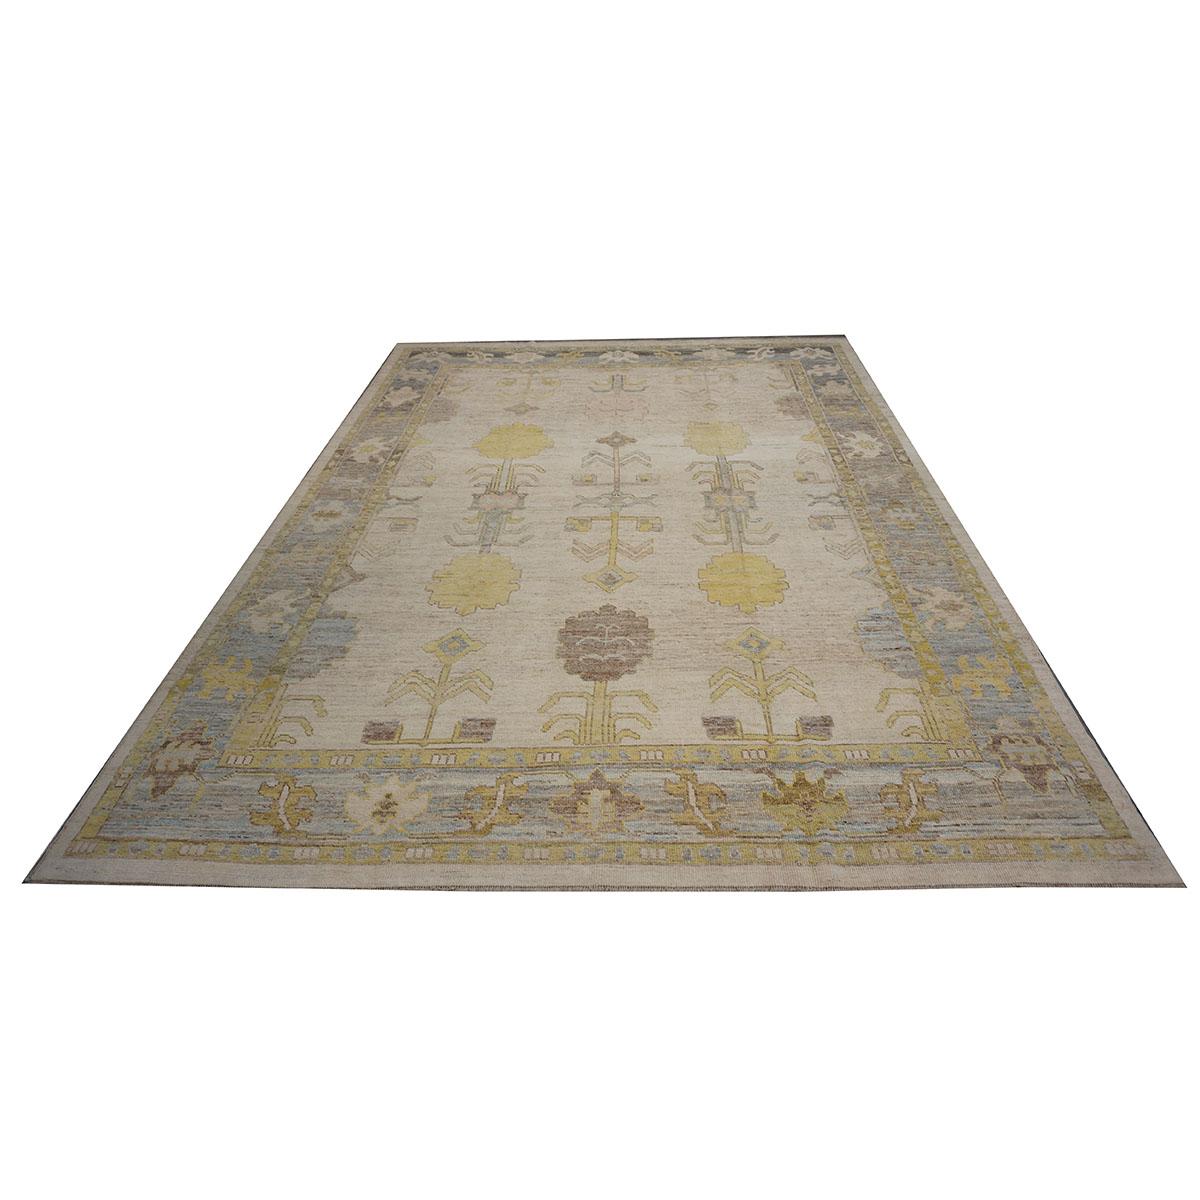 Ashly Fine rugs presents a 21st century Turkish Oushak 10x13. Oushak weavings began in a location just south of Istanbul, in a region that was to become the rugs namesake, Oushak. Although nomads first produced the rugs for personal use only, since